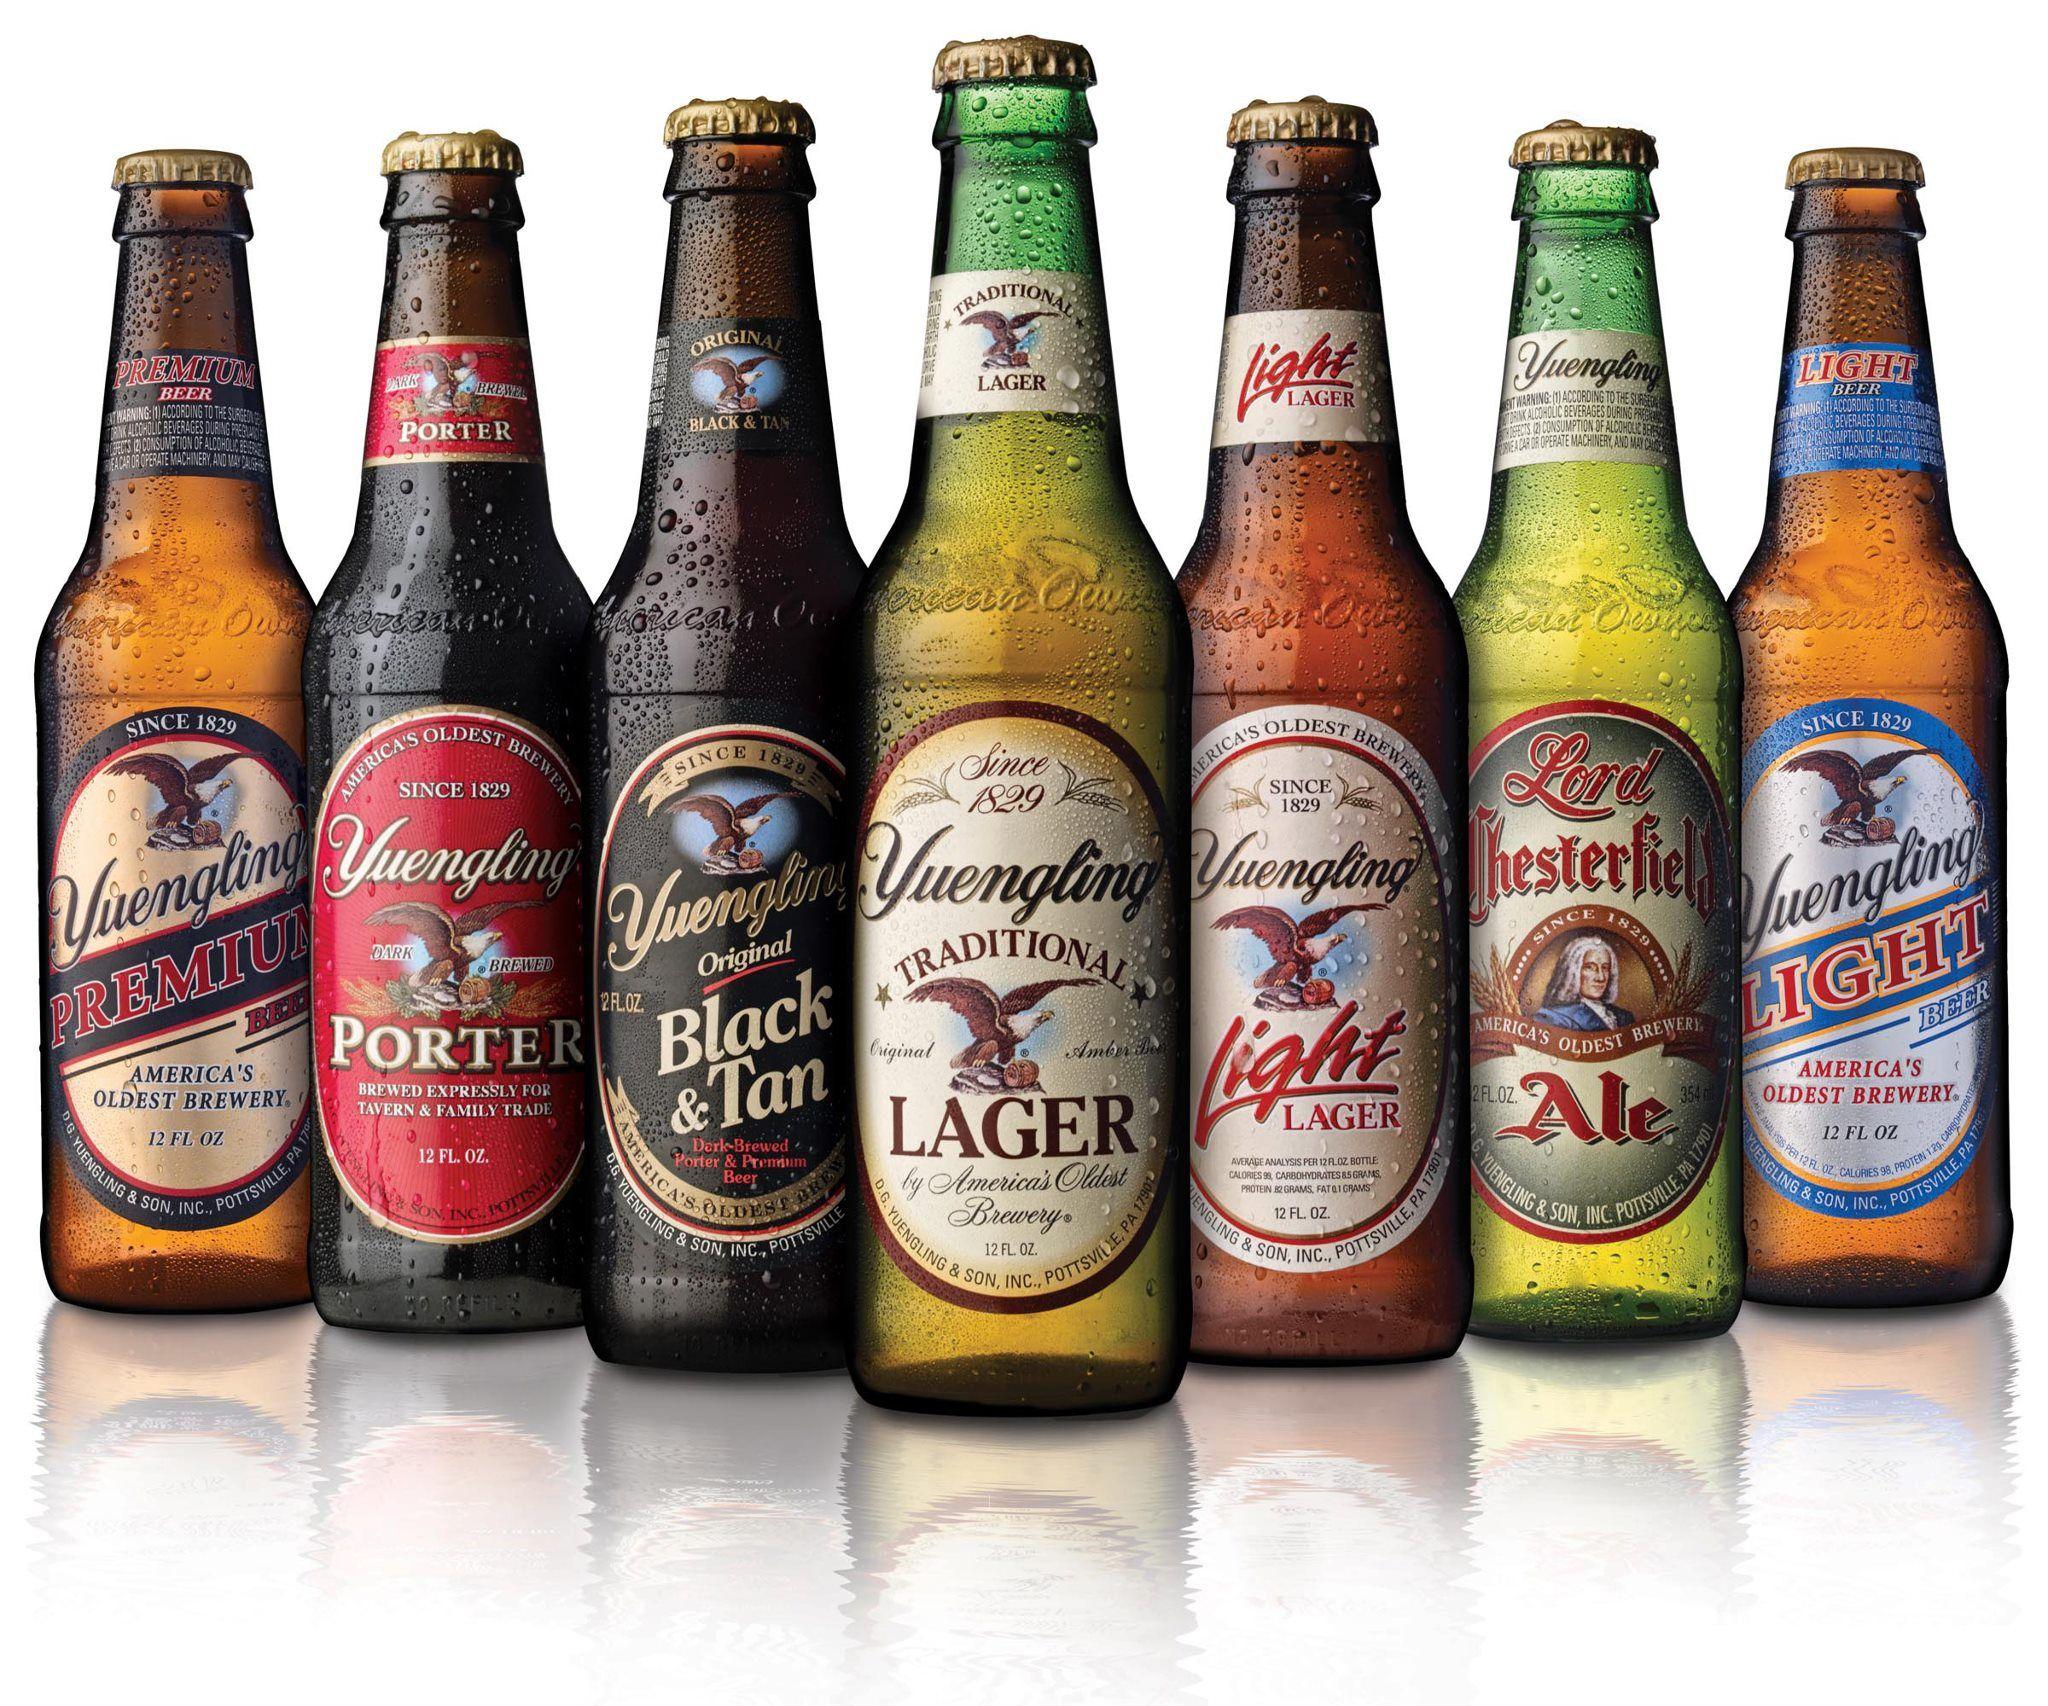 Leading Beer Lager Logo - Yuengling is No. 1 craft brewing company in the country and 4th